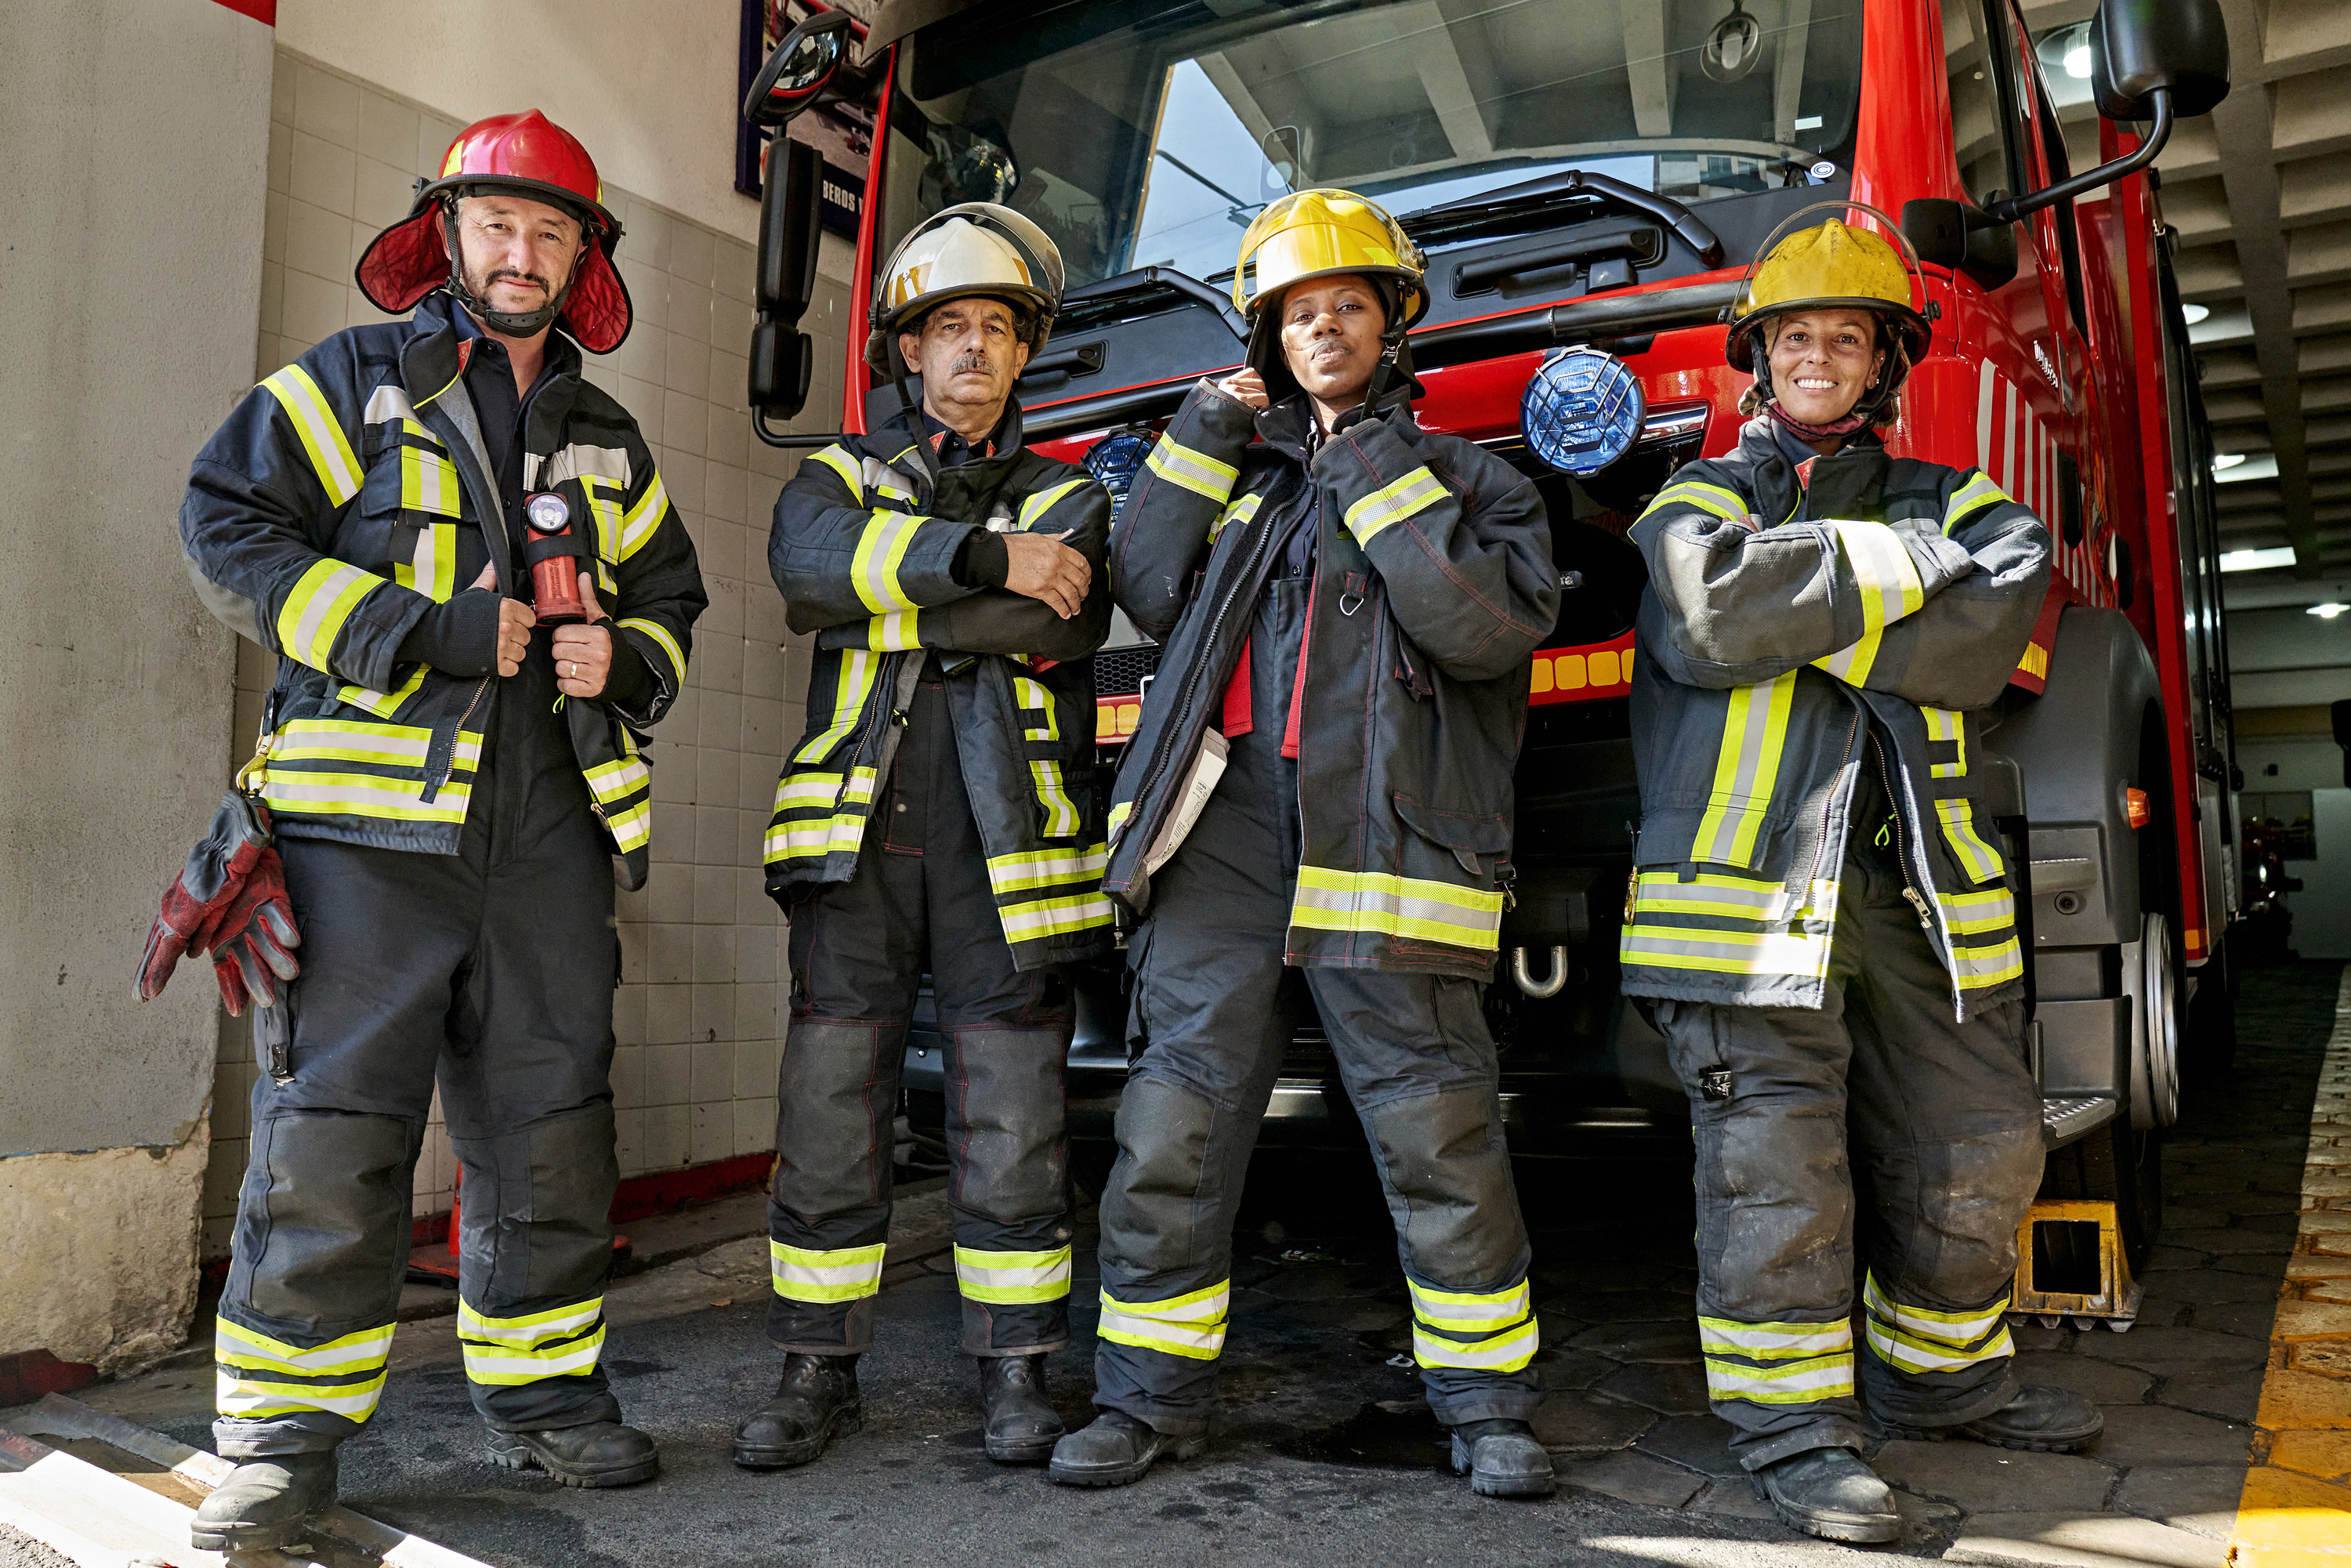 Four firefighters posing in front of a firetruck